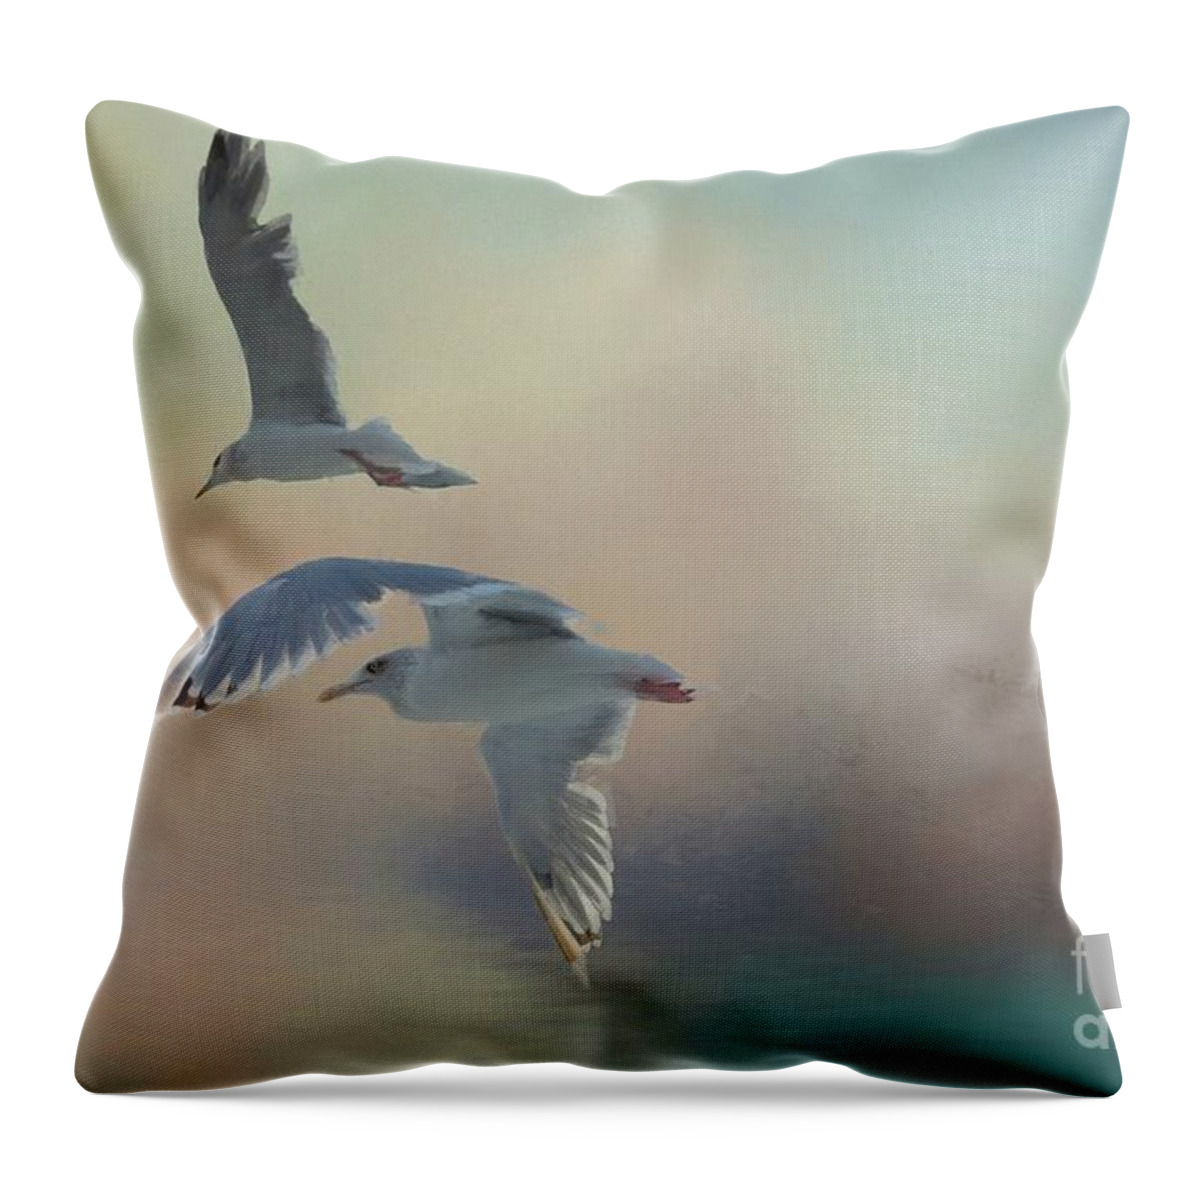 Seagulls Throw Pillow featuring the photograph Seagulls by Eva Lechner